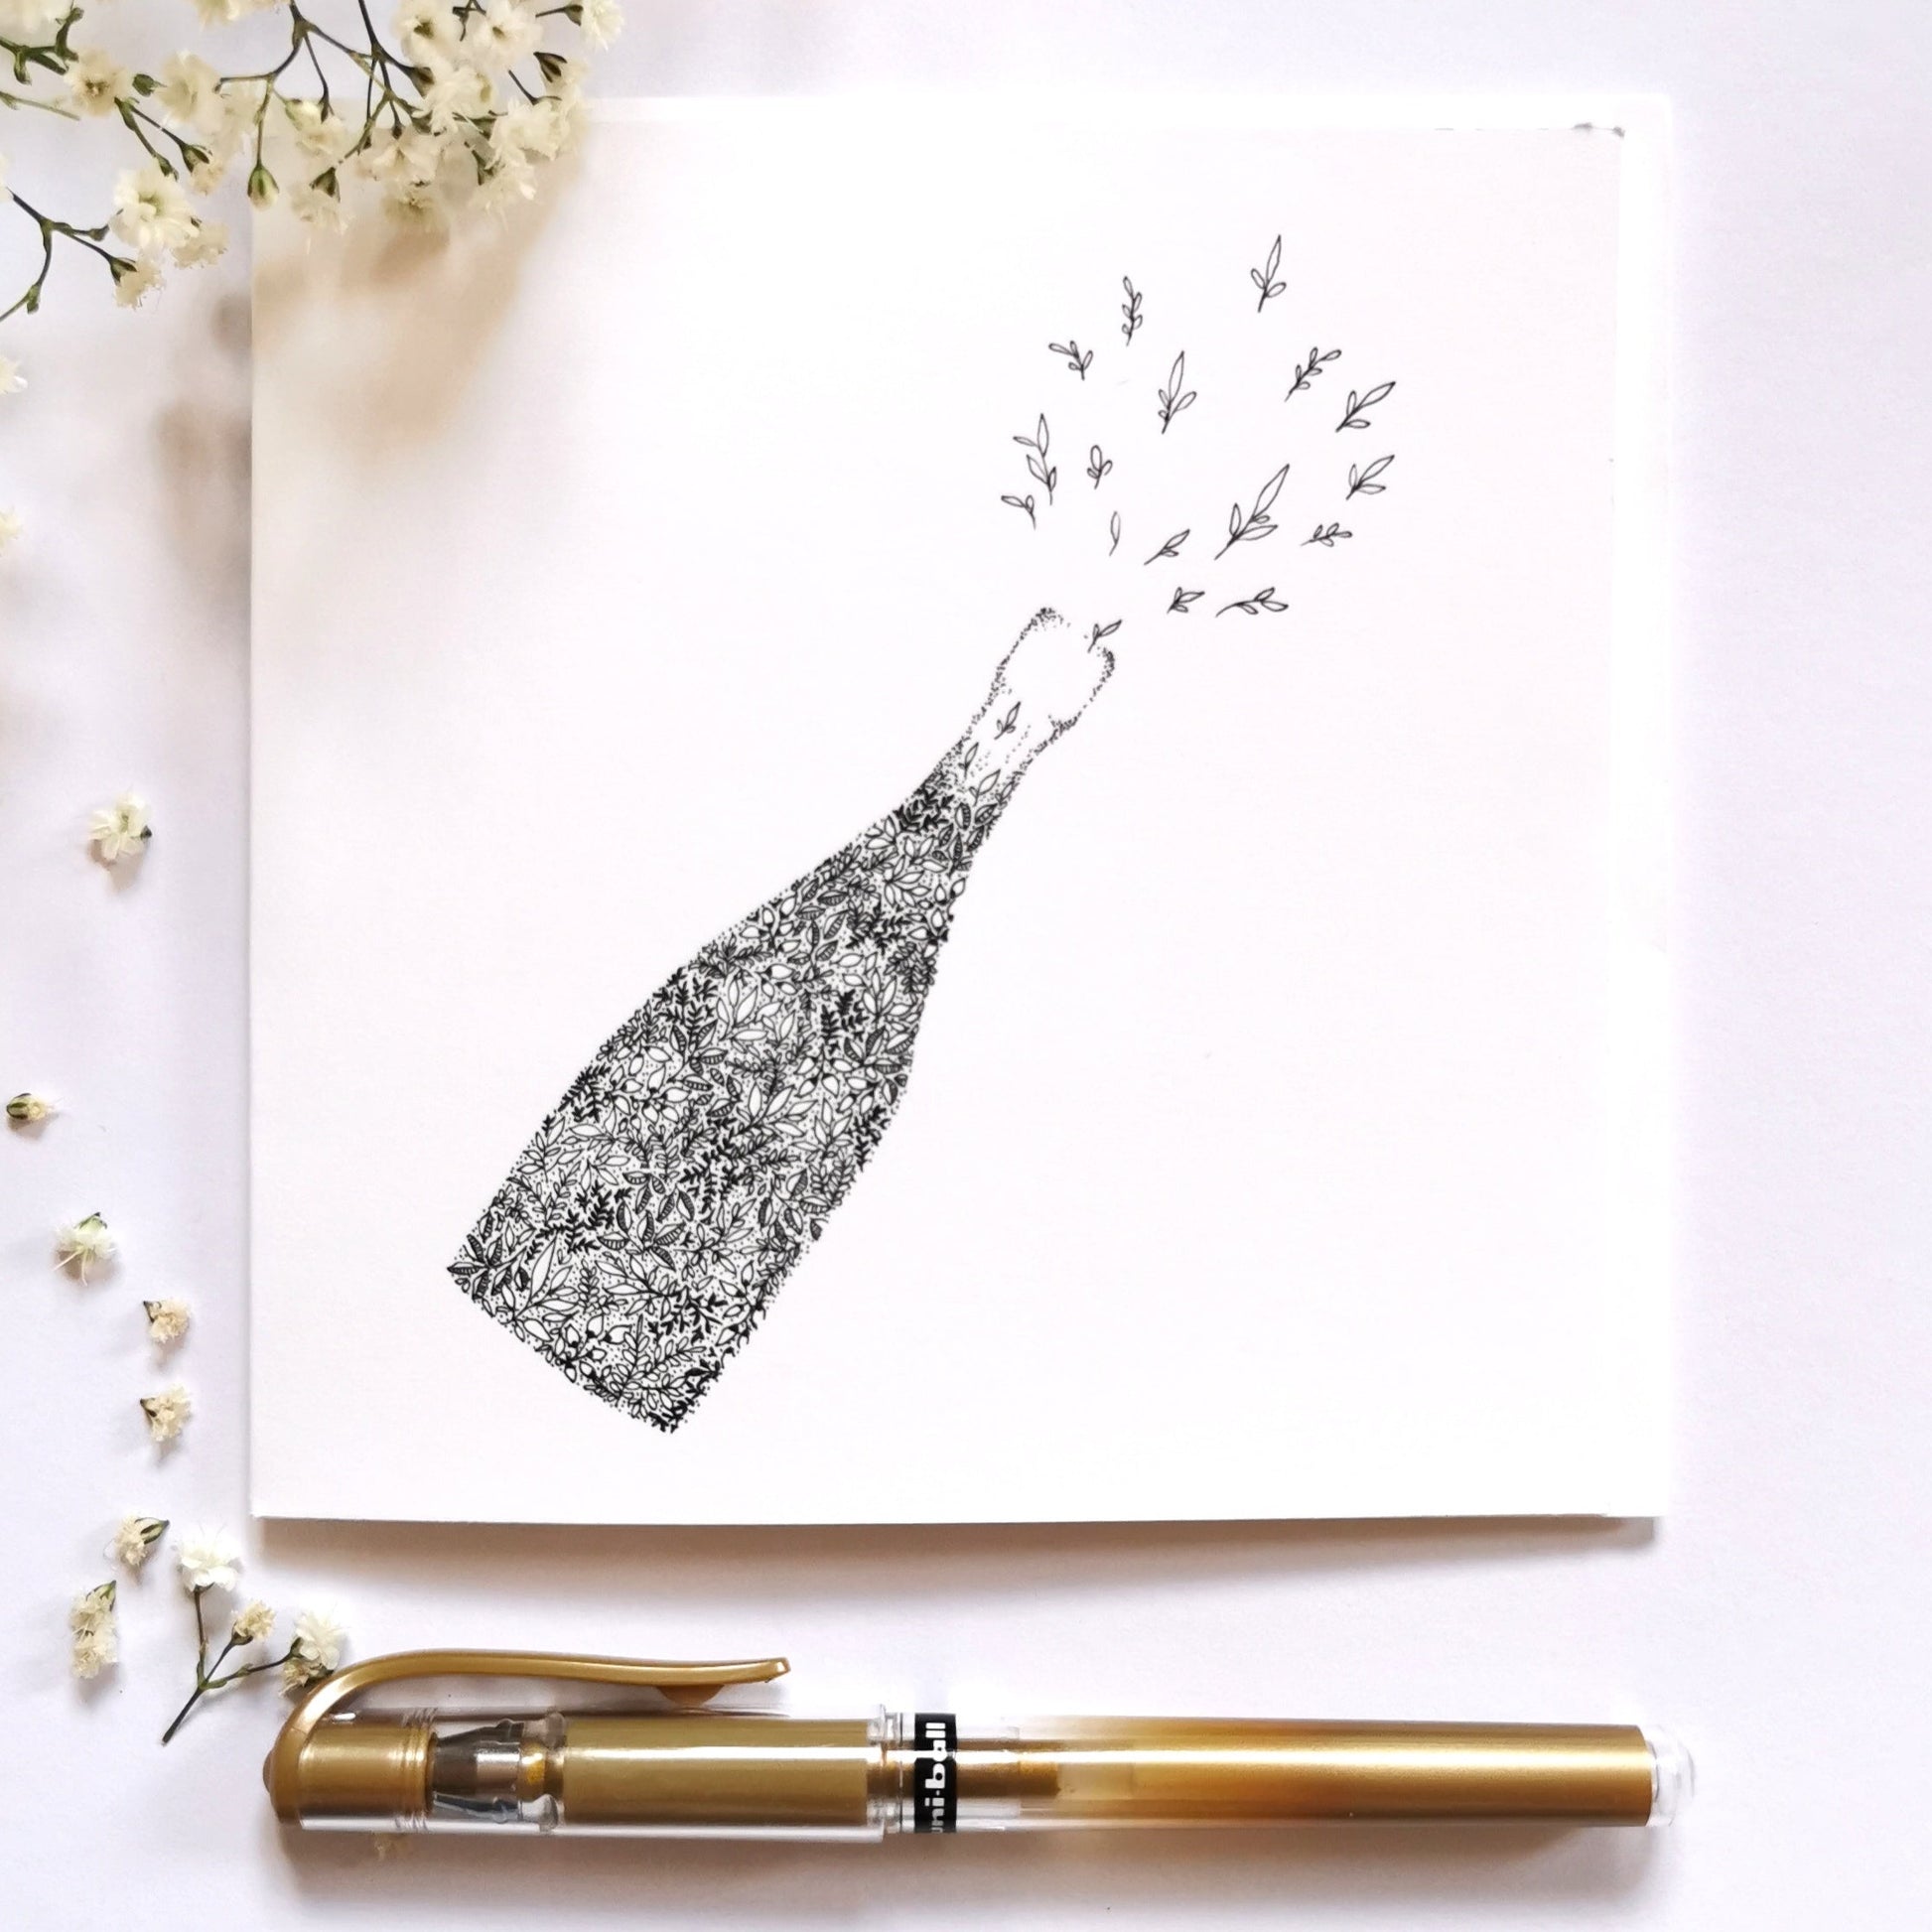 Image shows illustration of champagne bottle made entirely of black and white floral drawings. Bottle is slanted towards the right as if it had just been popped open with tiny flowers spritzing out the bottle as if it was the foam of a champagne bottle popping. Image is set on a cream table with a gold pen at the bottom of the image and white flowers on the left hand side of the image to show what illustration would look dressed up